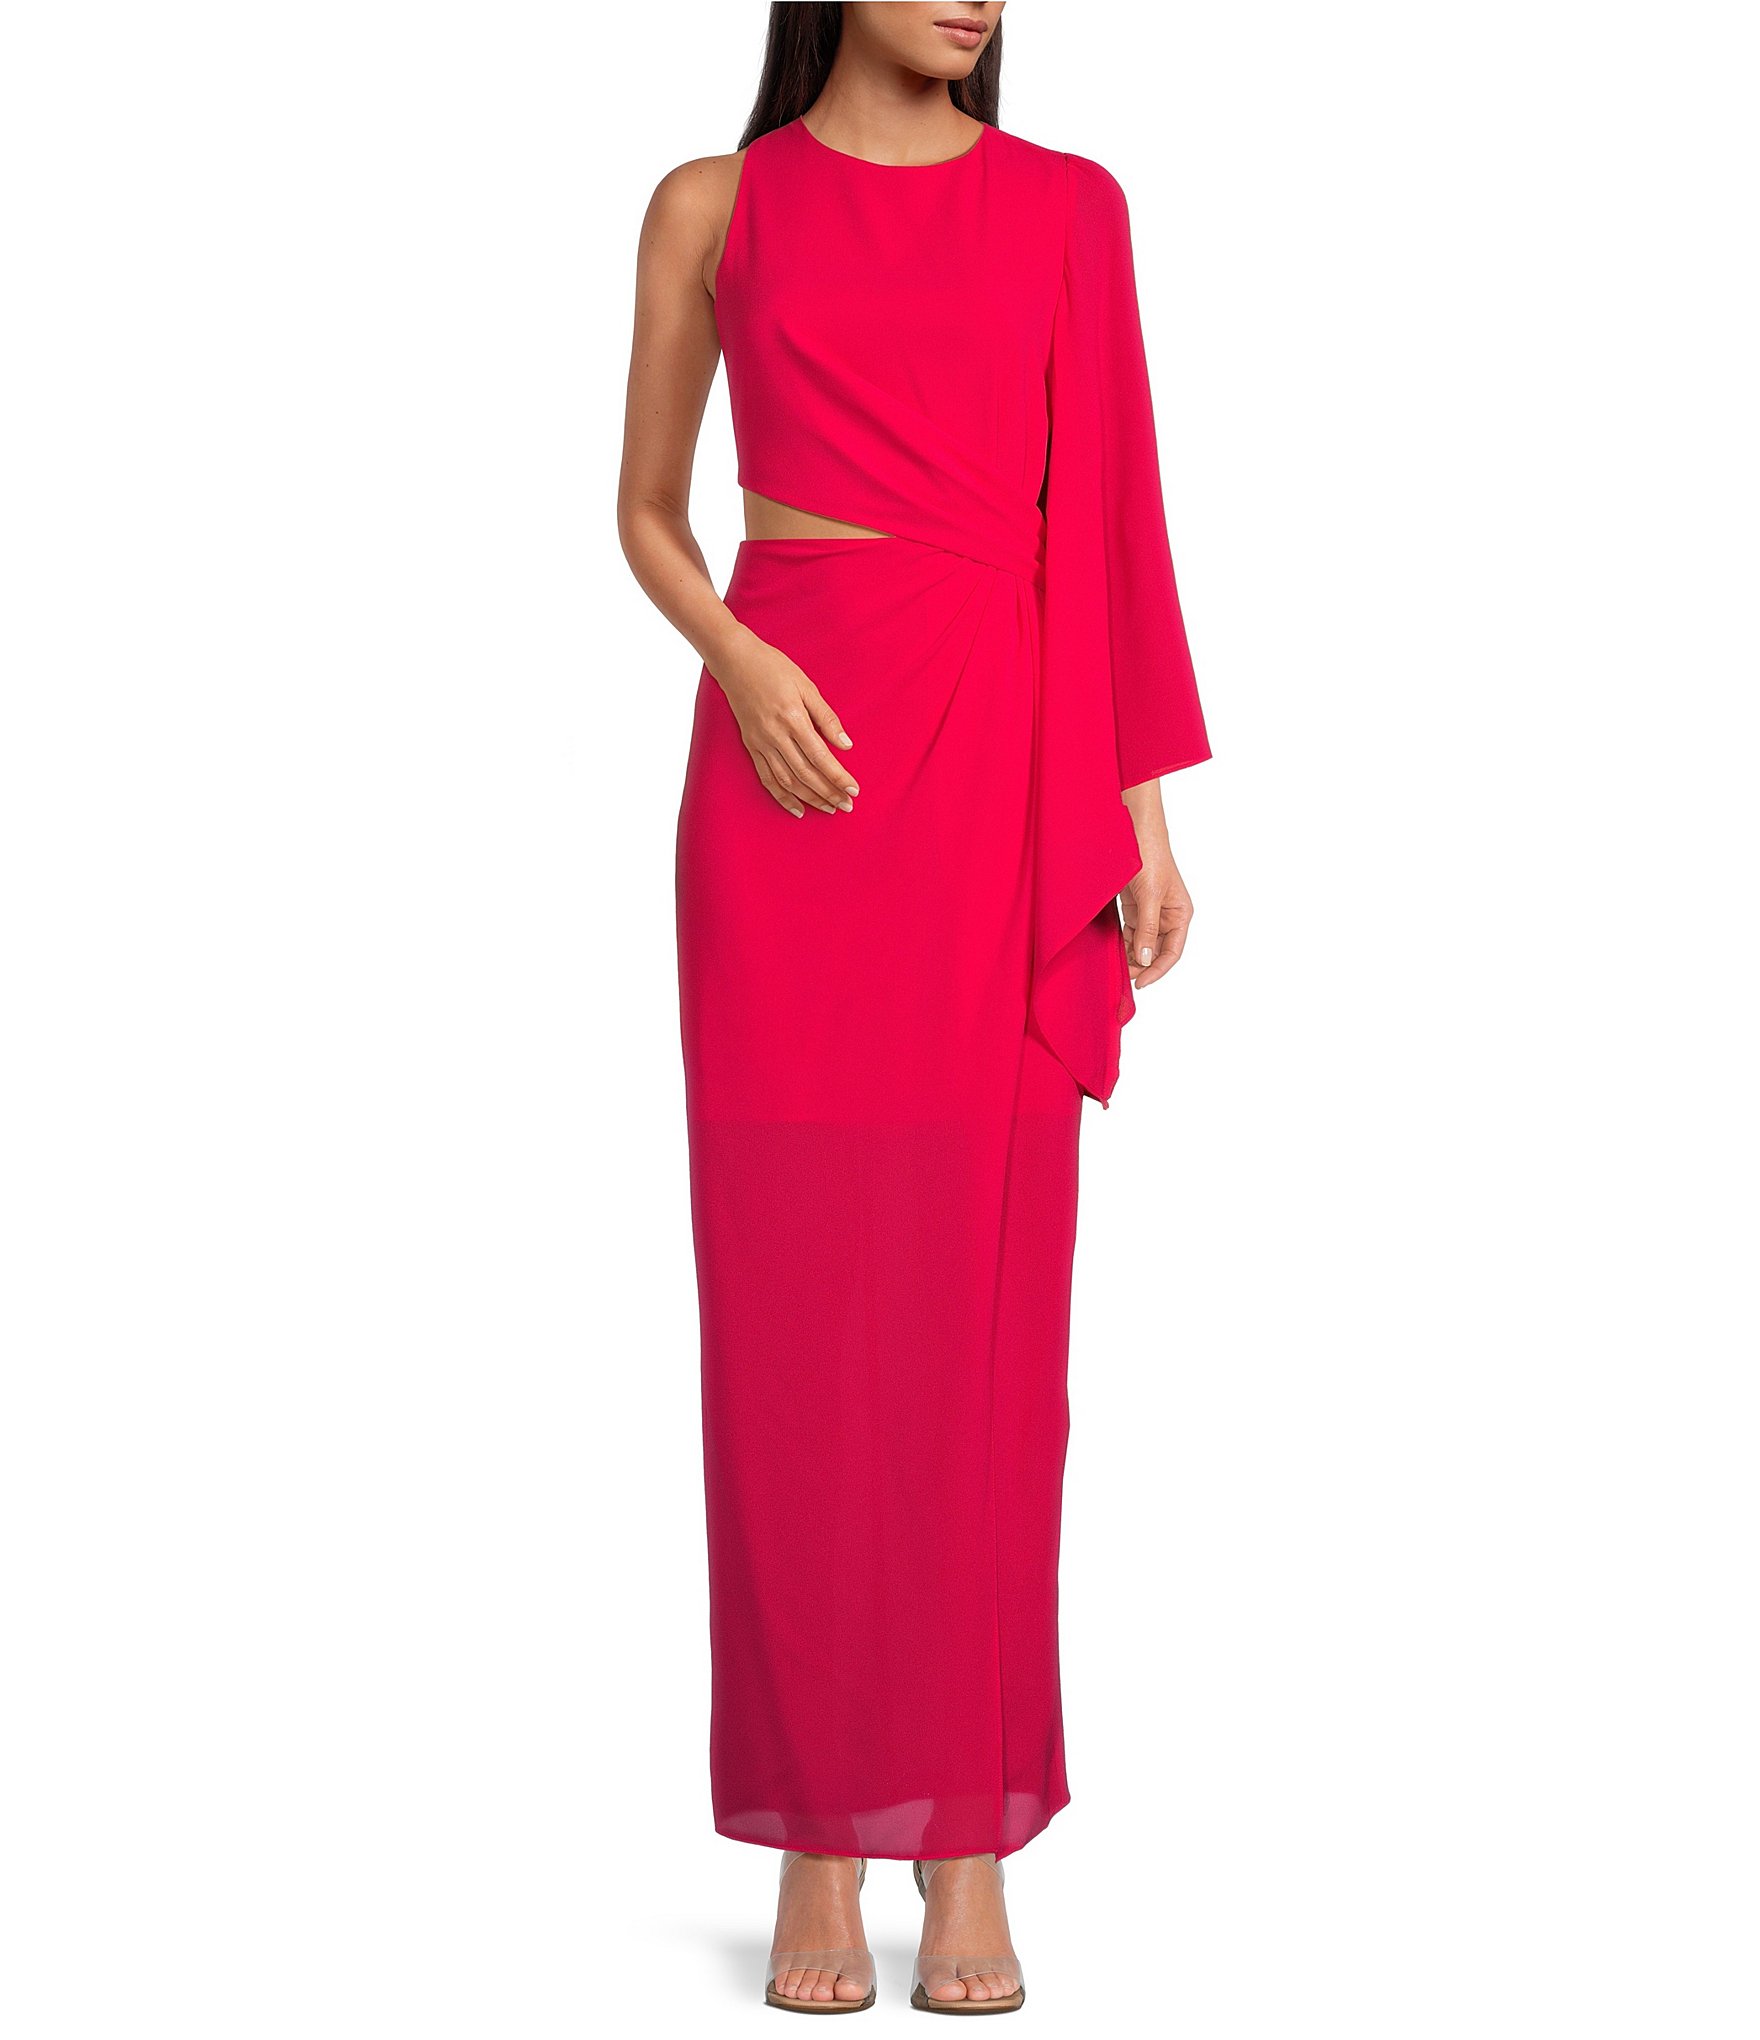 Clearance Red Women's Formal Dresses & Evening Gowns